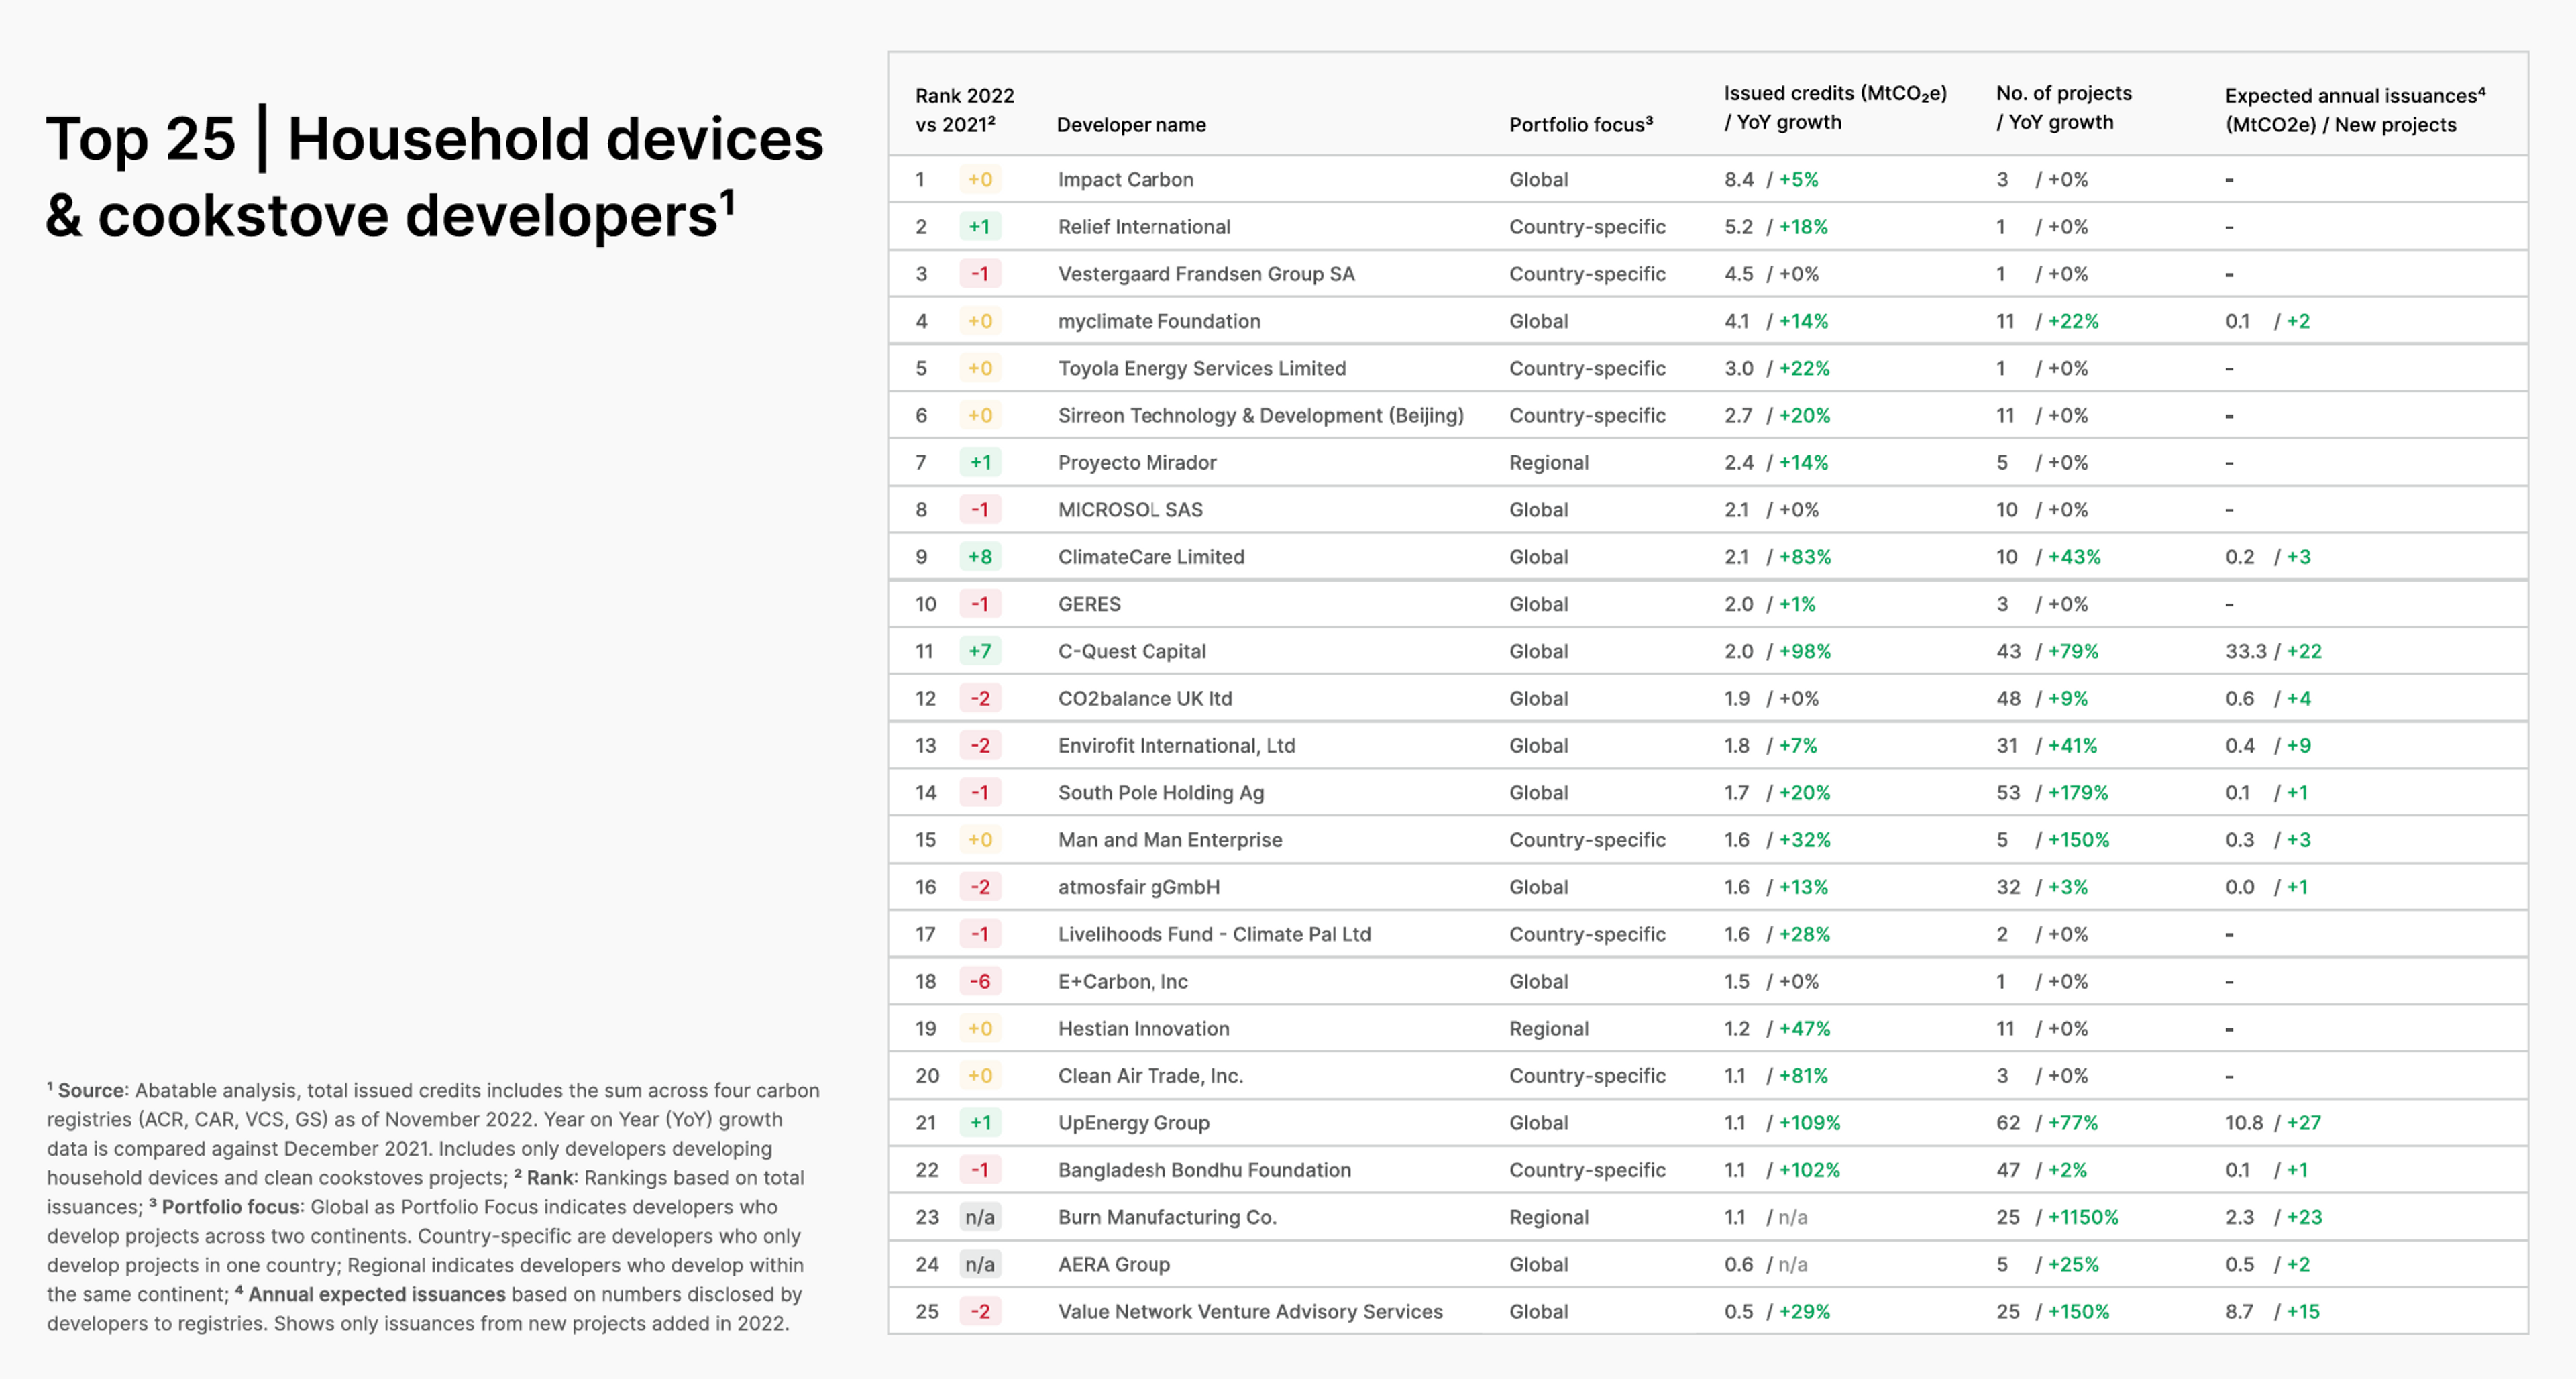 Graph of the Top 25 Project Developers for Household Devices and Cookstoves